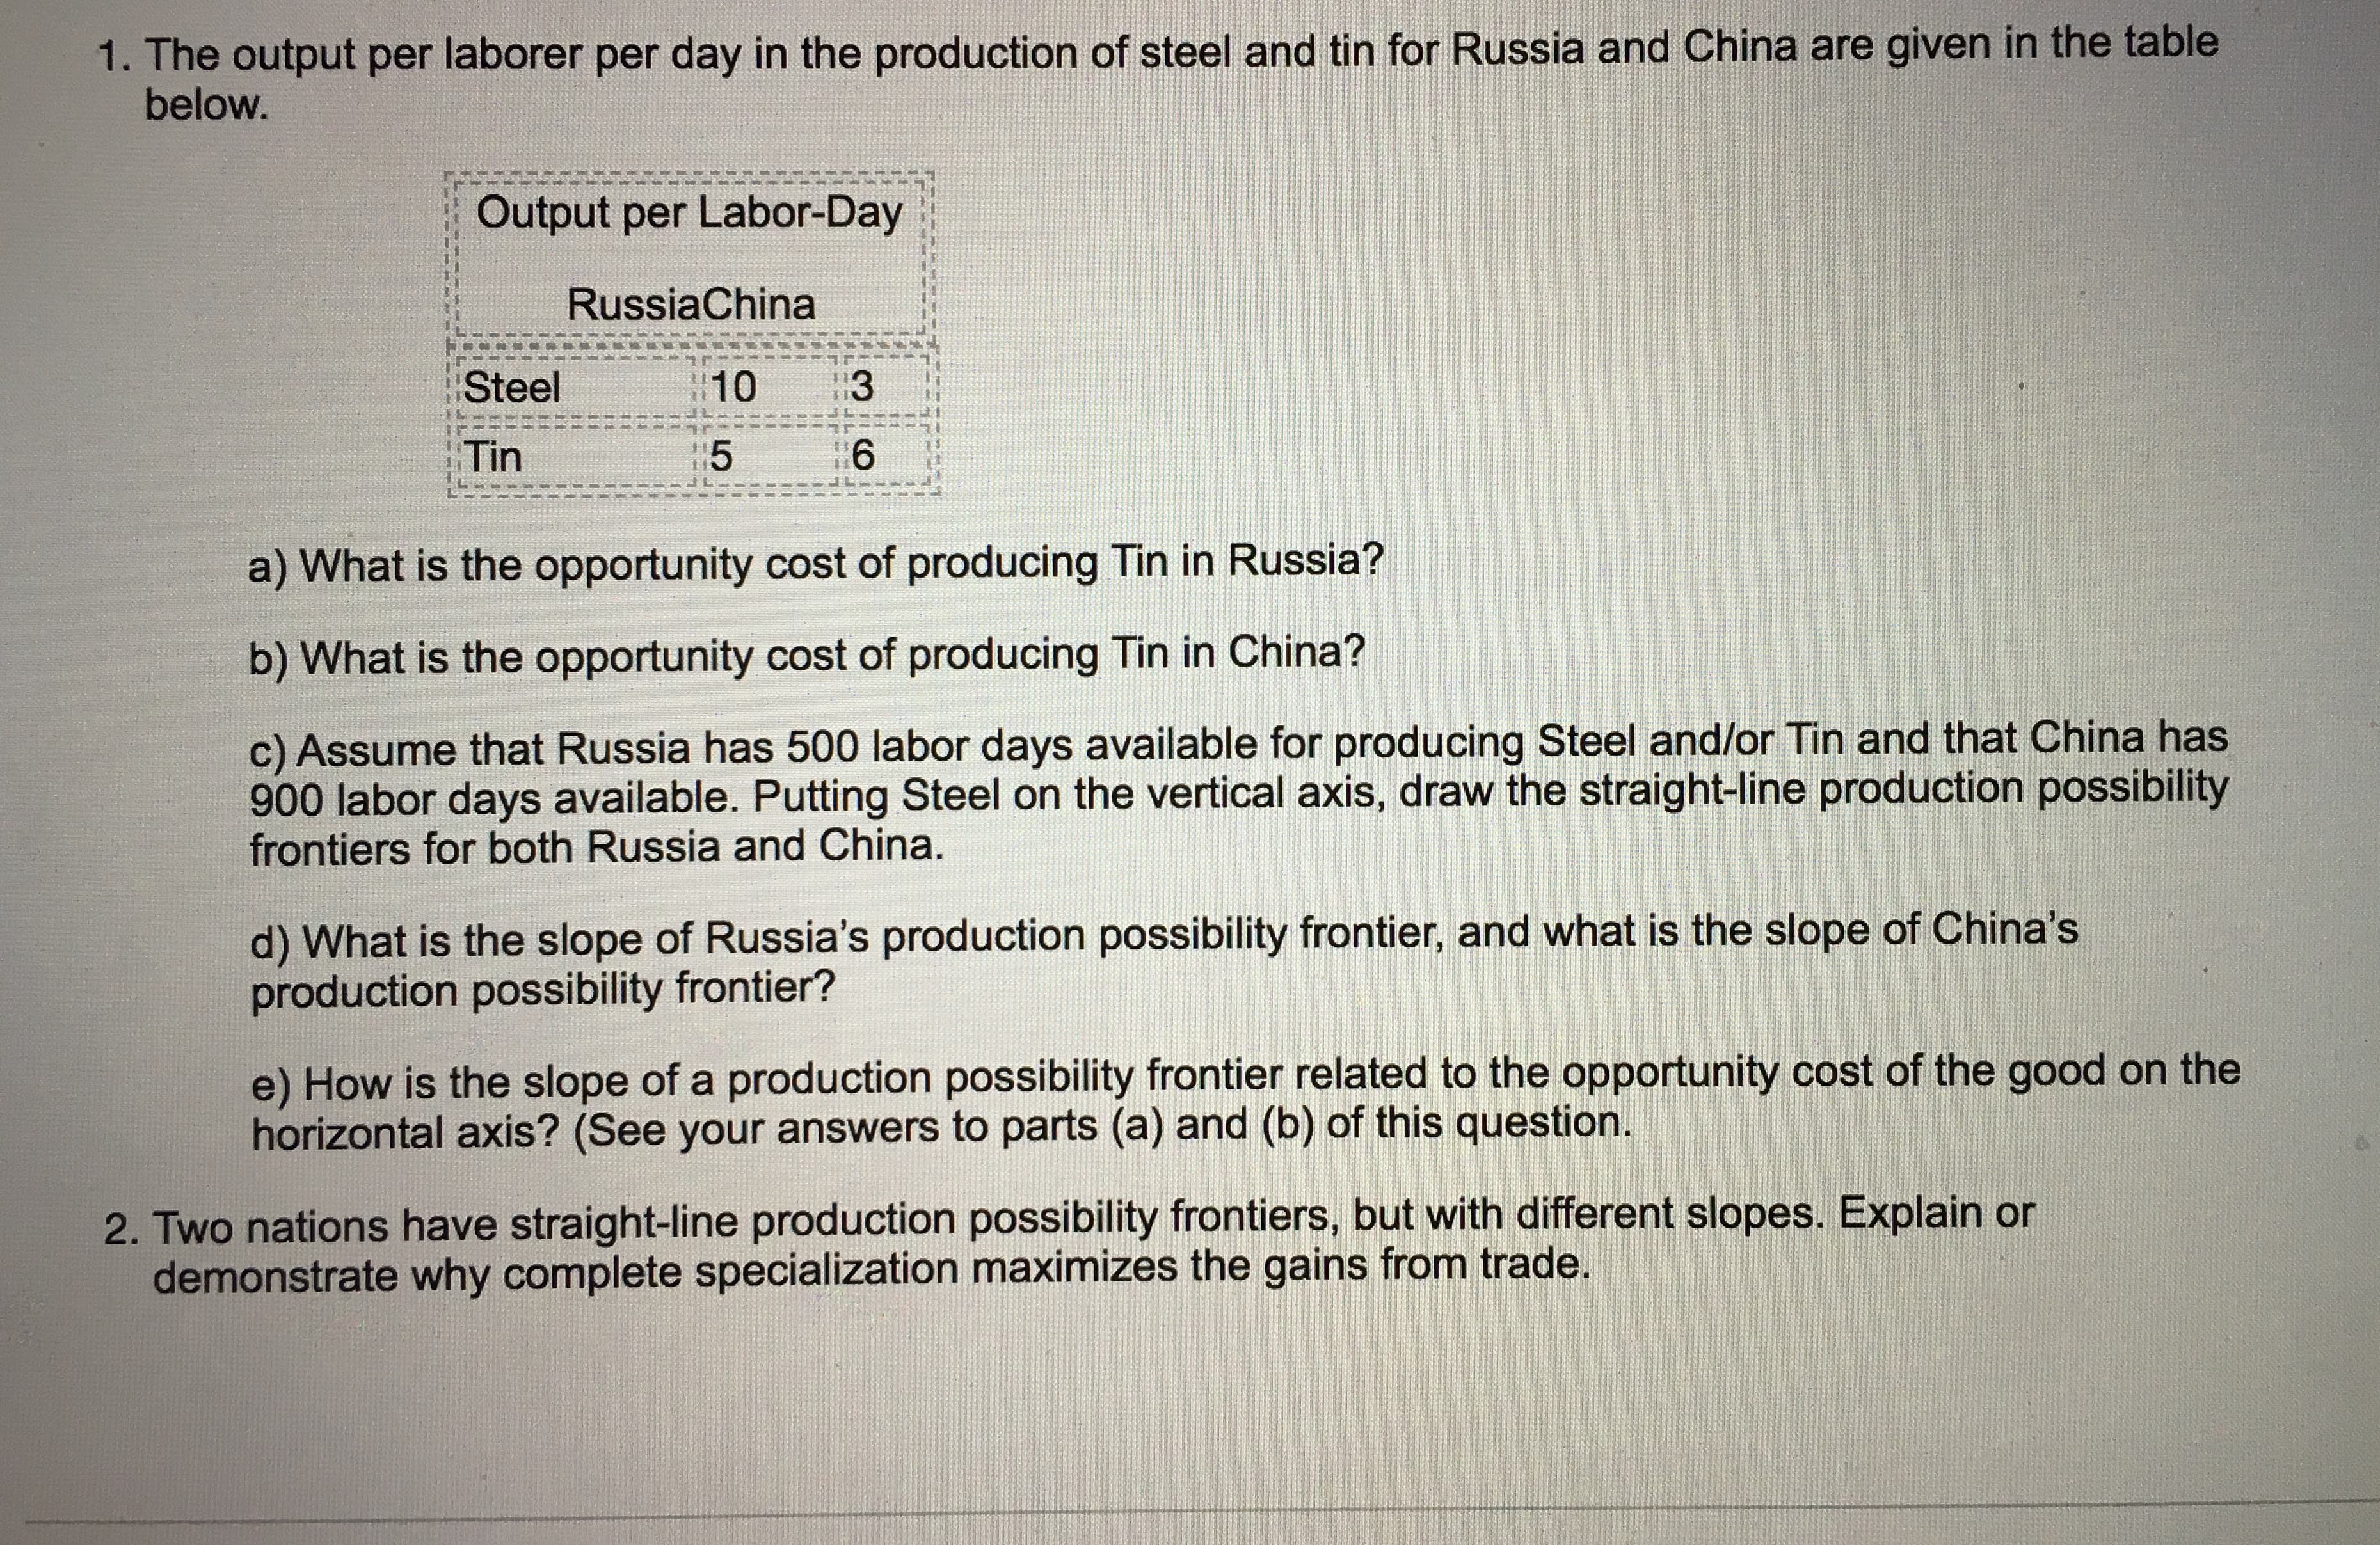 1. The output per laborer per day in the production of steel and tin for Russia and China are given in the table
below.
Output per Labor-Day
RussiaChina
Steel
10
3
5
6
Tin
a) What is the opportunity cost of producing Tin in Russia?
b) What is the opportunity cost of producing Tin in China?
c) Assume that Russia has 500 labor days available for producing Steel and/or Tin and that China has
900 labor days available. Putting Steel on the vertical axis, draw the straight-line production possibility
frontiers for both Russia and China.
d) What is the slope of Russia's production possibility frontier, and what is the slope of China's
production possibility frontier?
e) How is the slope of a production possibility frontier related to the opportunity cost of the good on the
horizontal axis? (See your answers to parts (a) and (b) of this question.
2. Two nations have straight-line production possibility frontiers, but with different slopes. Explain or
demonstrate why complete specialization maximizes the gains from trade.
CO
LO
